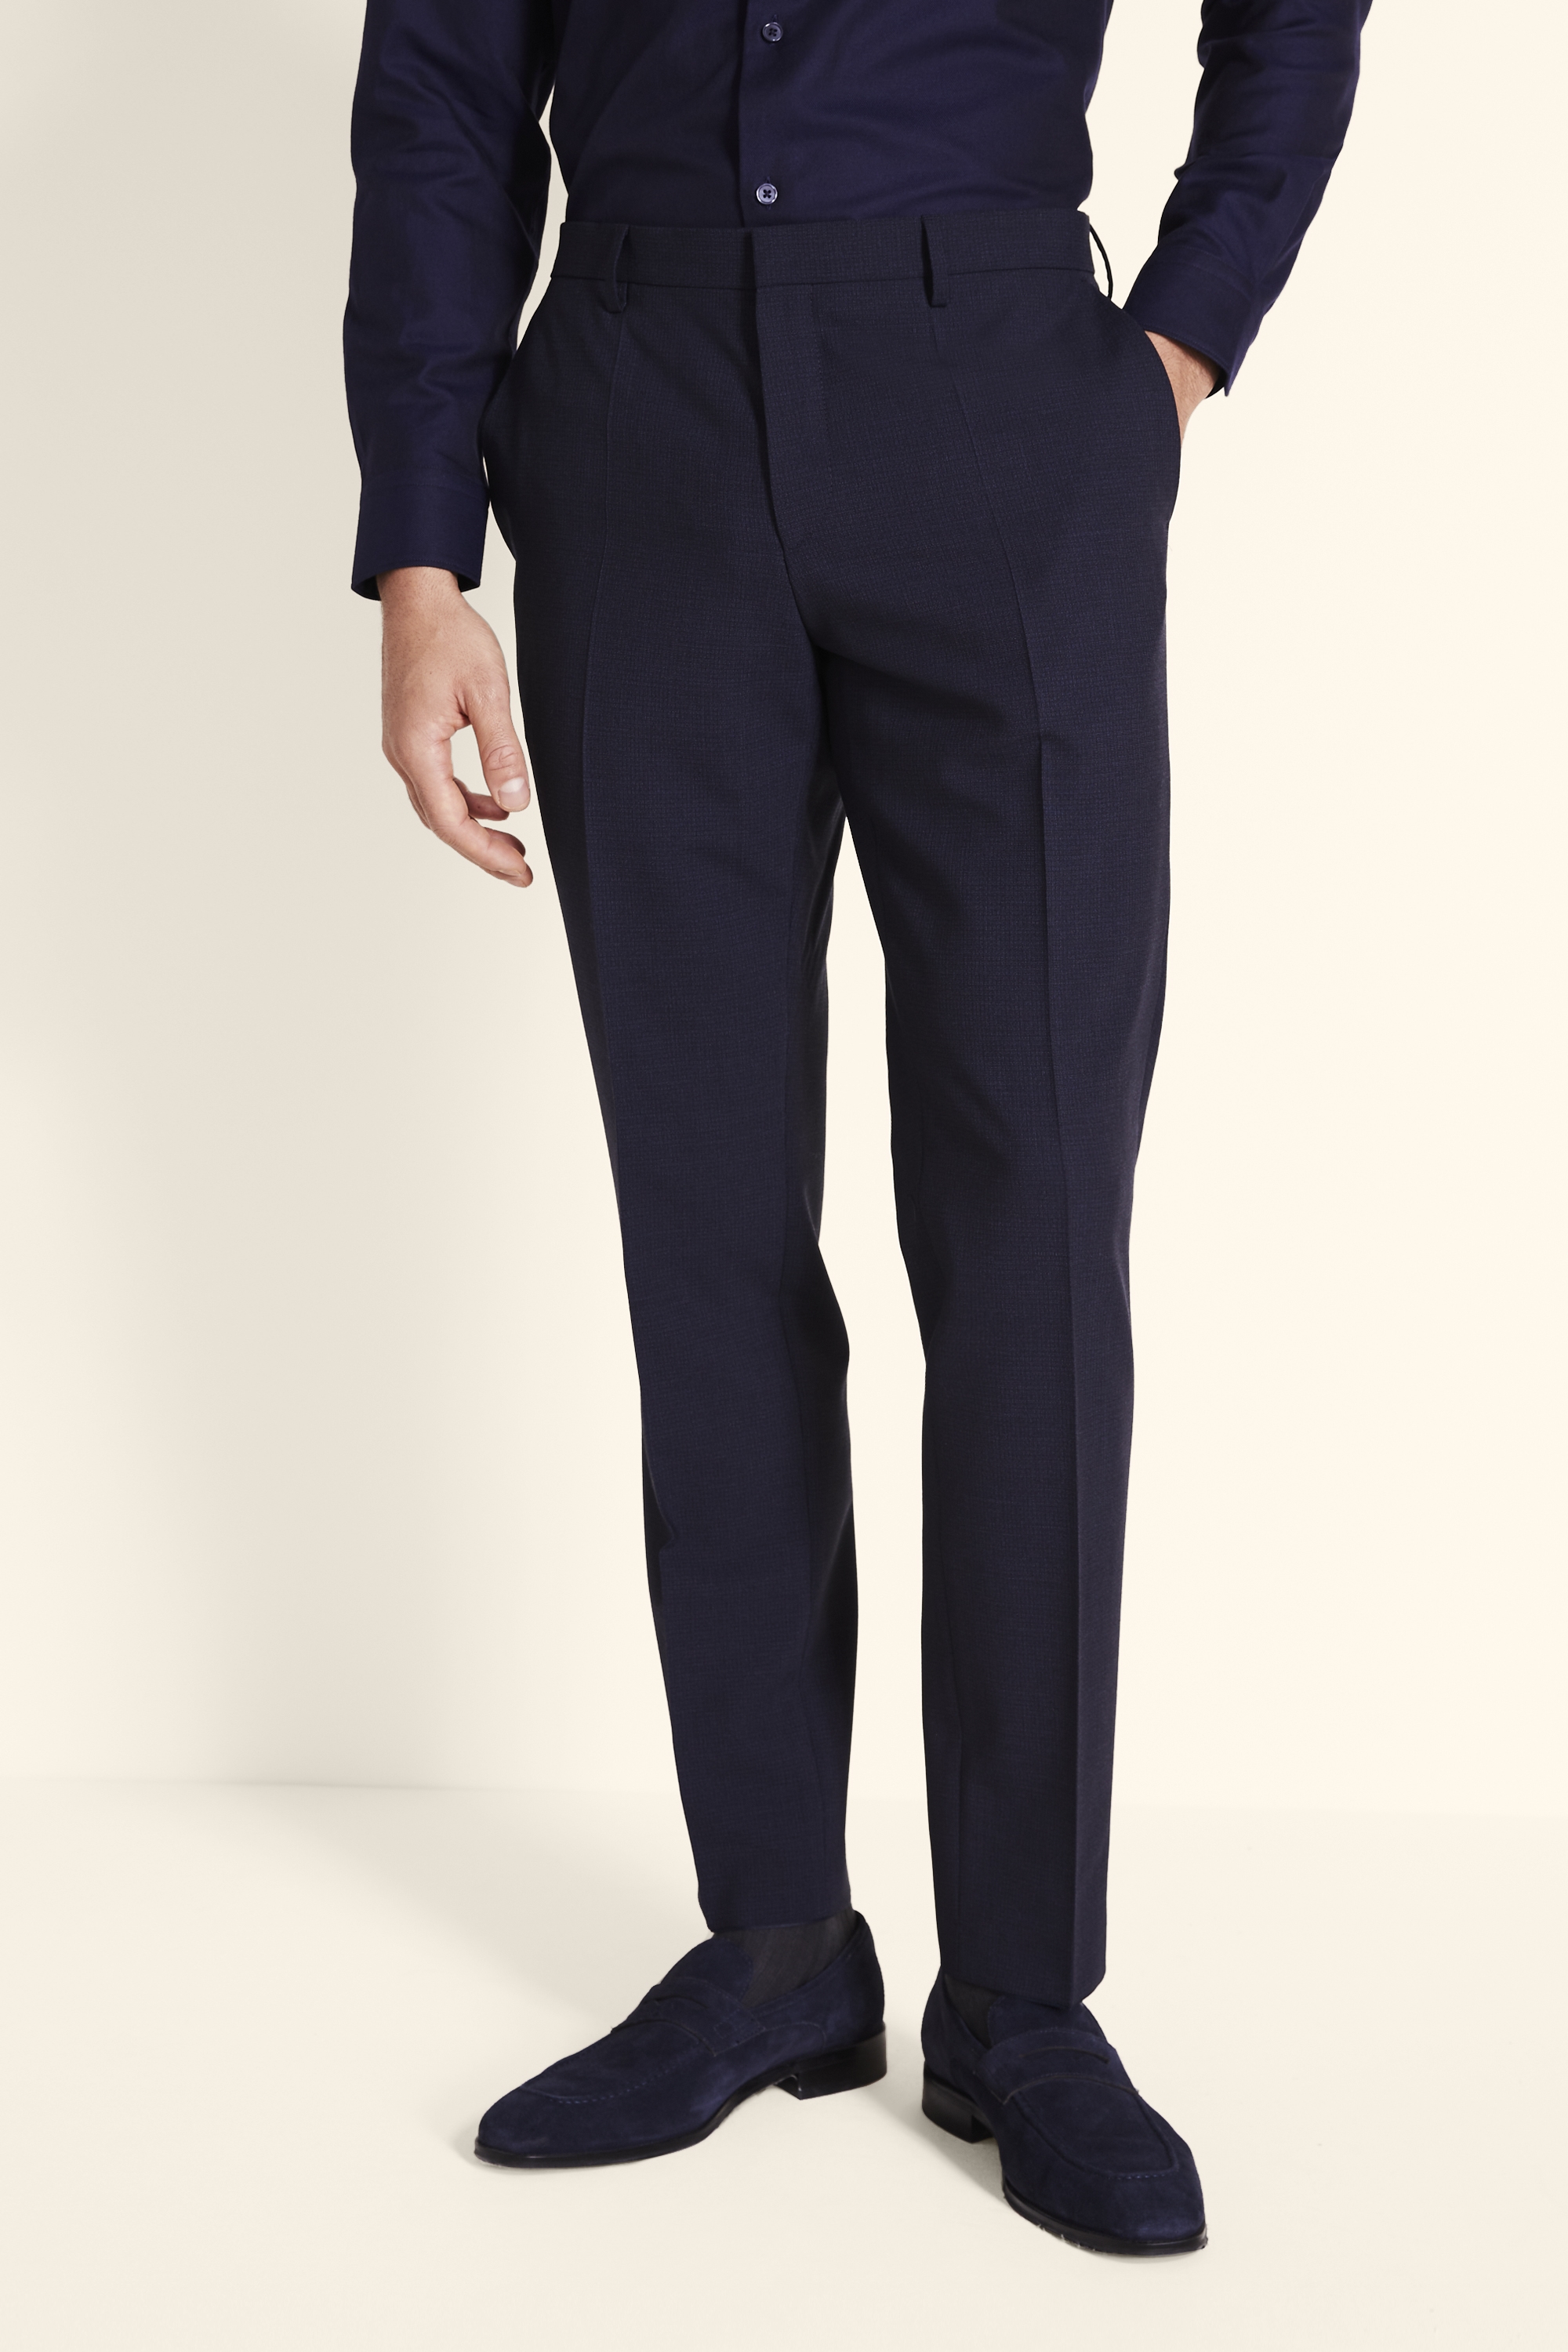 Buy online Navy-blue Textured Formal Trouser from Bottom Wear for Men by  Ennoble for ₹1079 at 64% off | 2023 Limeroad.com